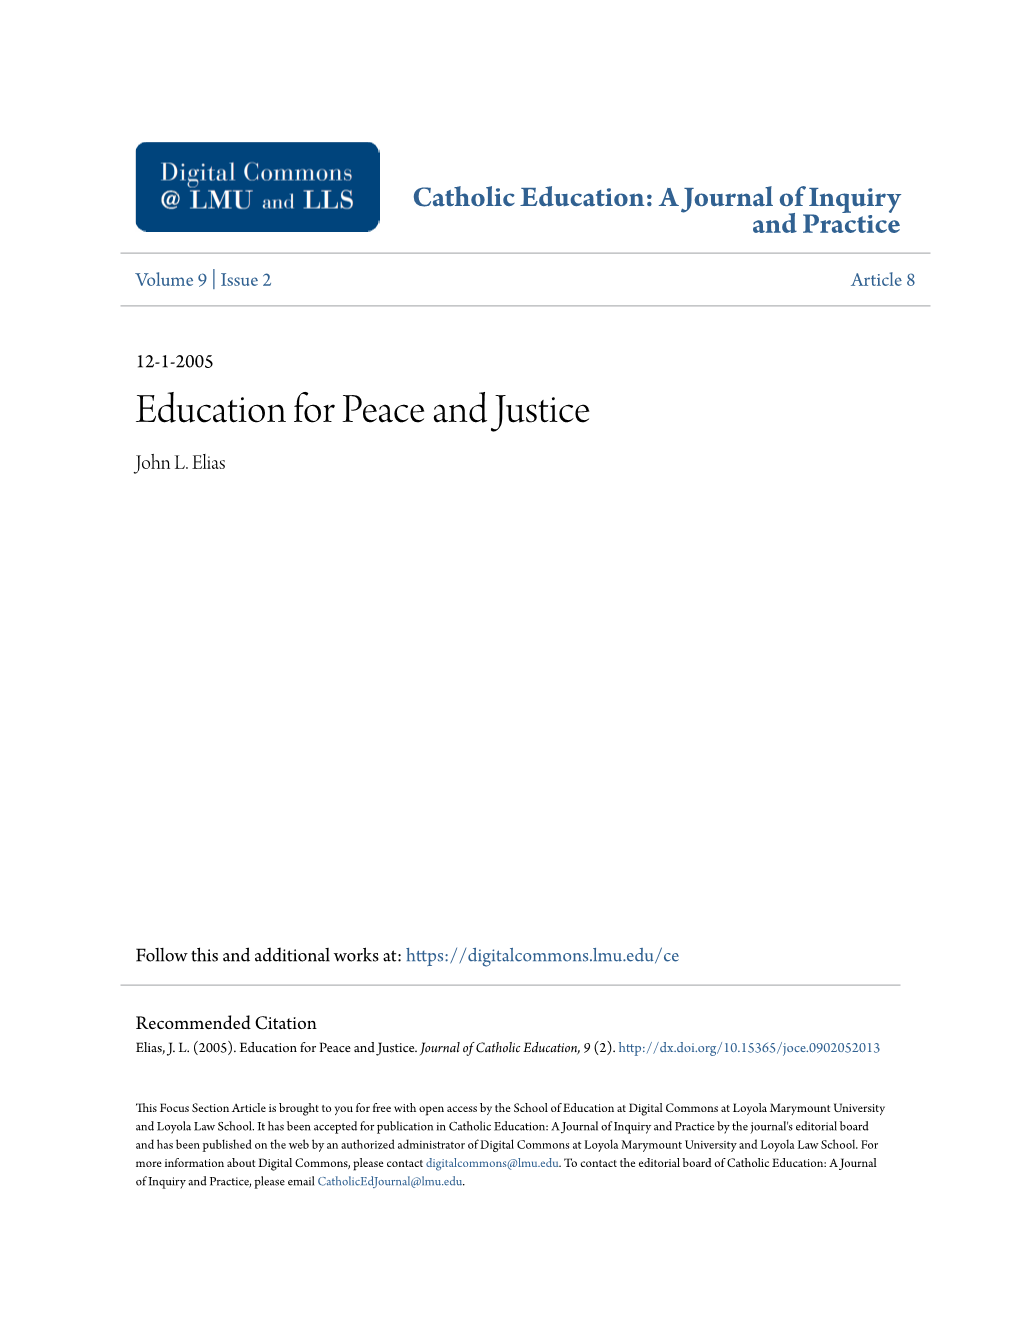 Education for Peace and Justice John L